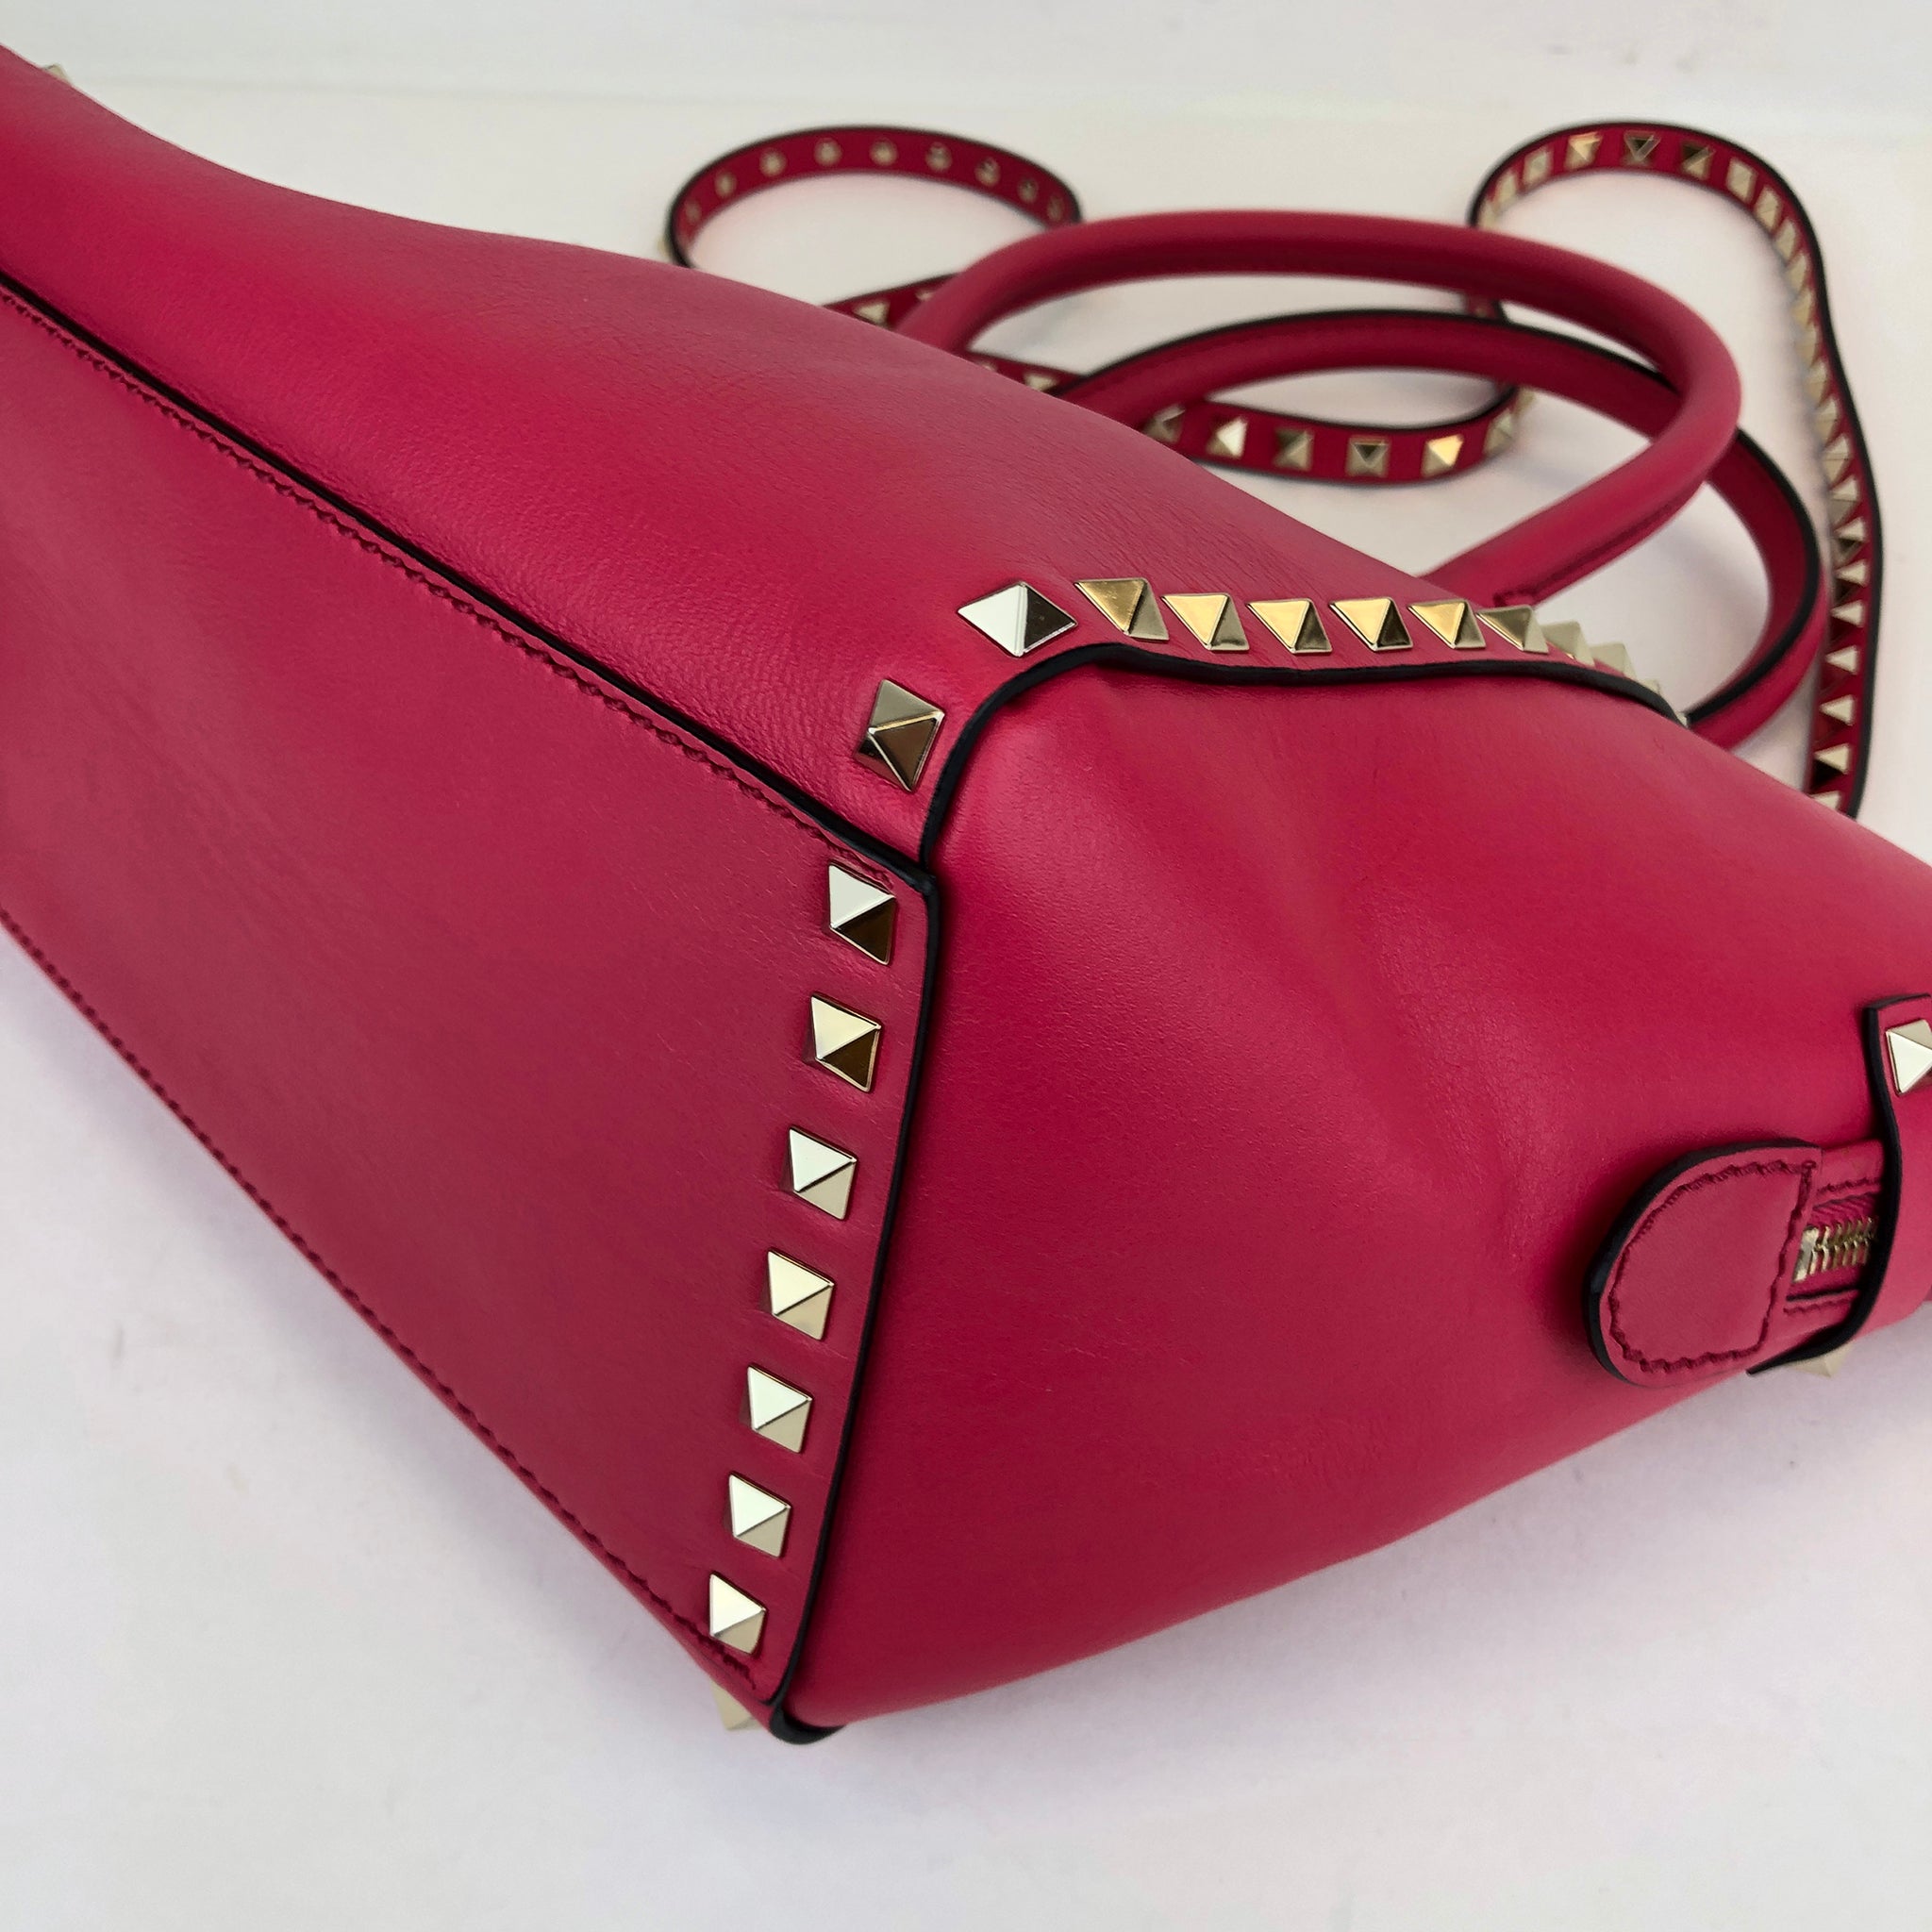 Rockstud Pink Convertible Tote (Pre-Owned)